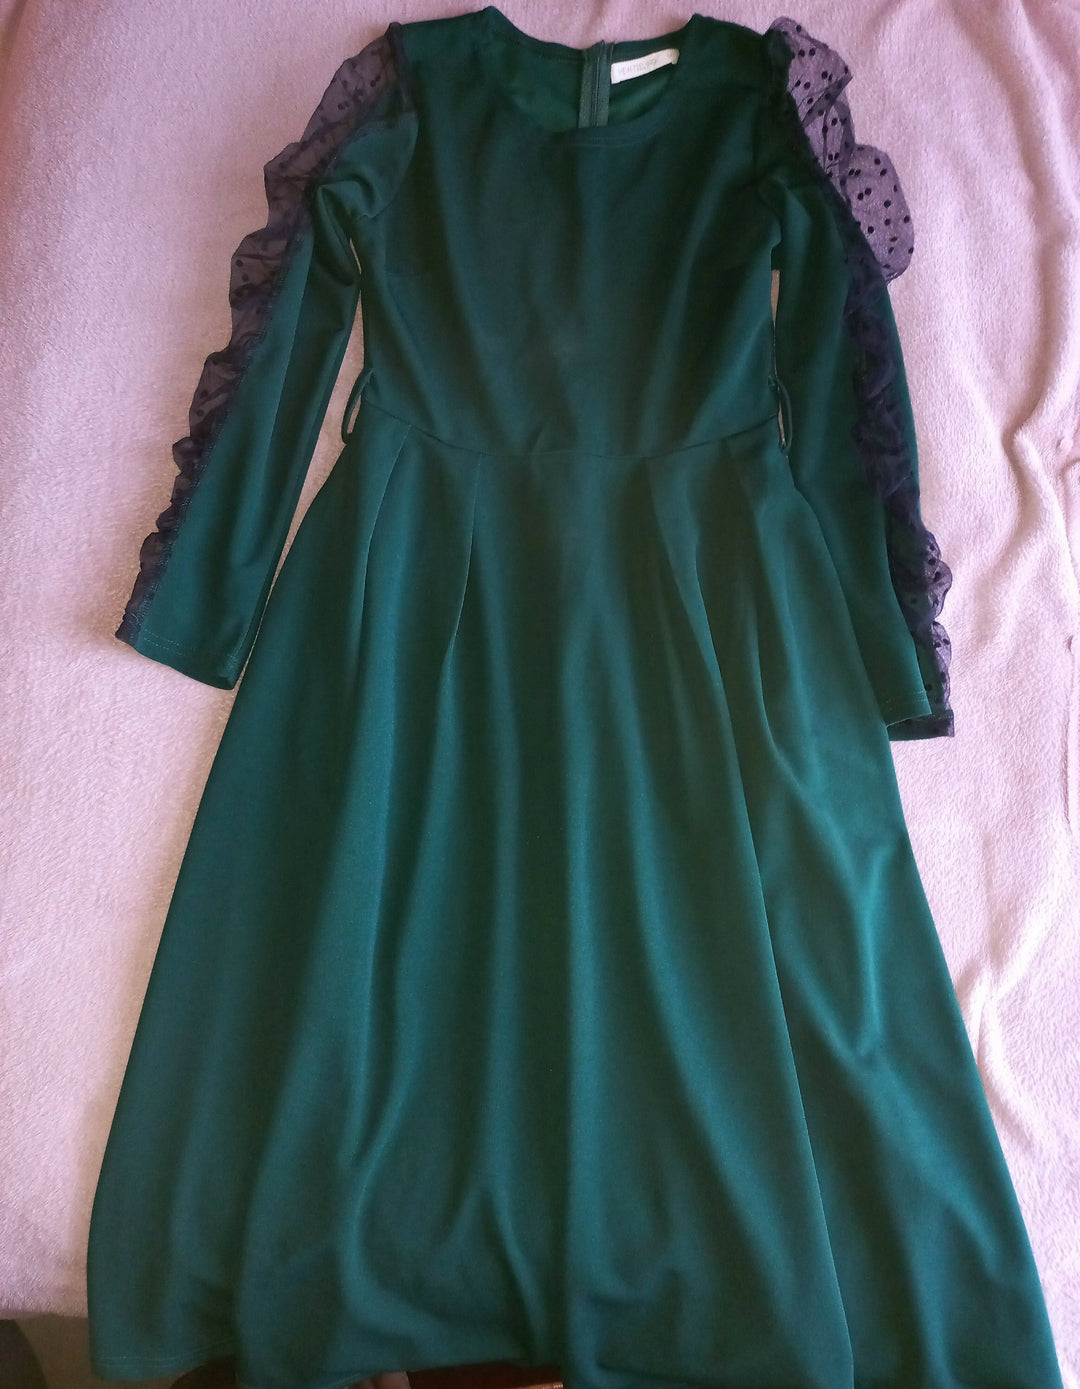 Image of Green and Black dress